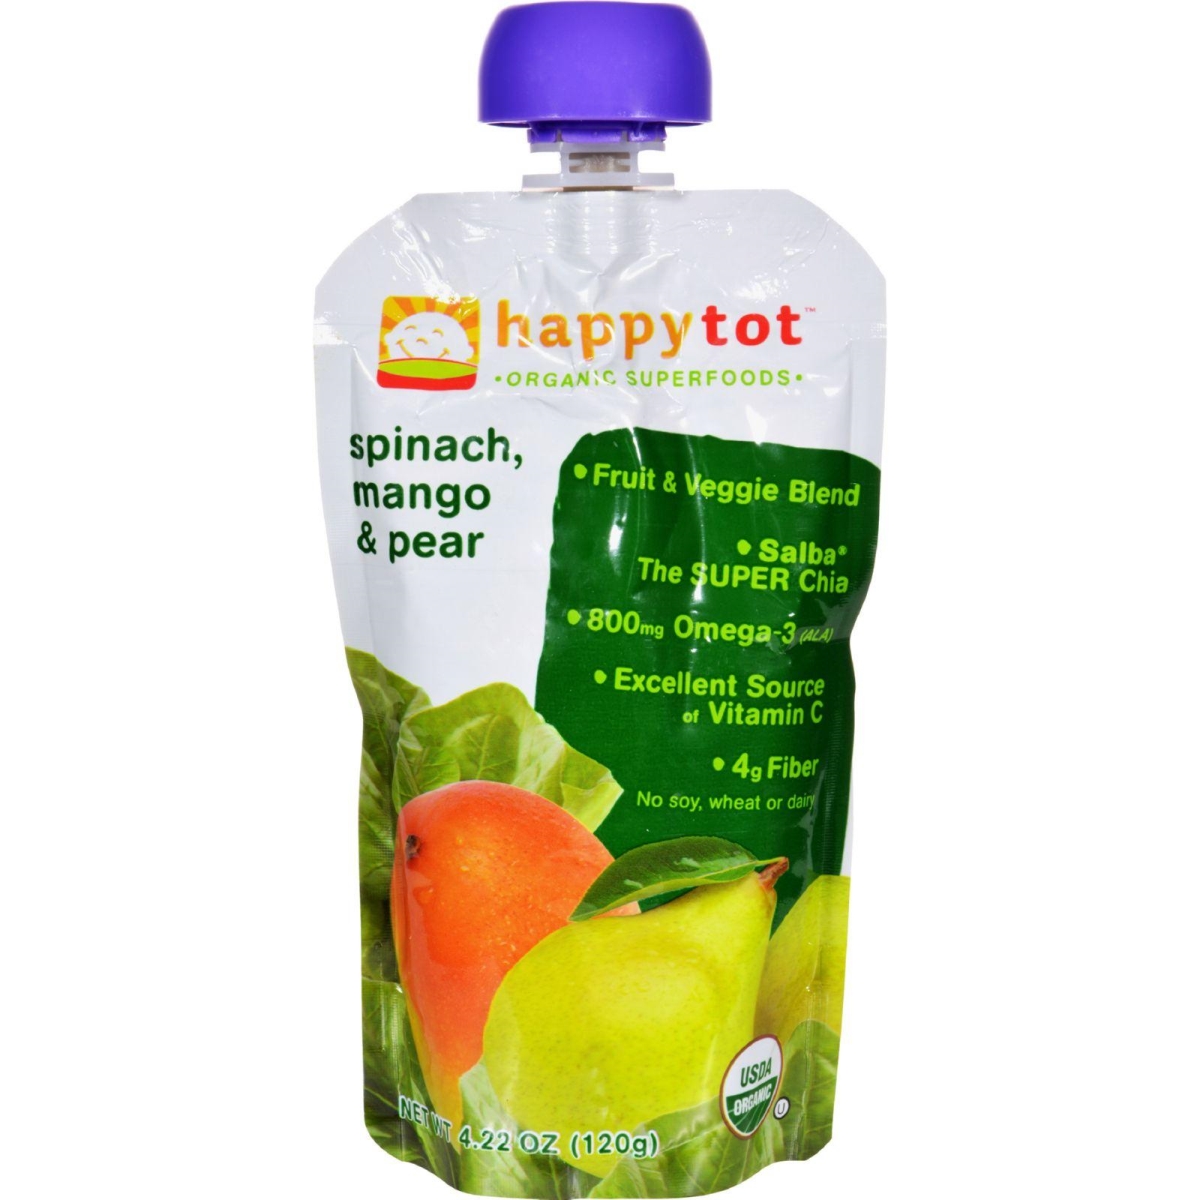 Hg0209791 4.22 Oz Happytot Organic Superfoods Spinach Mango & Pear, Case Of 16